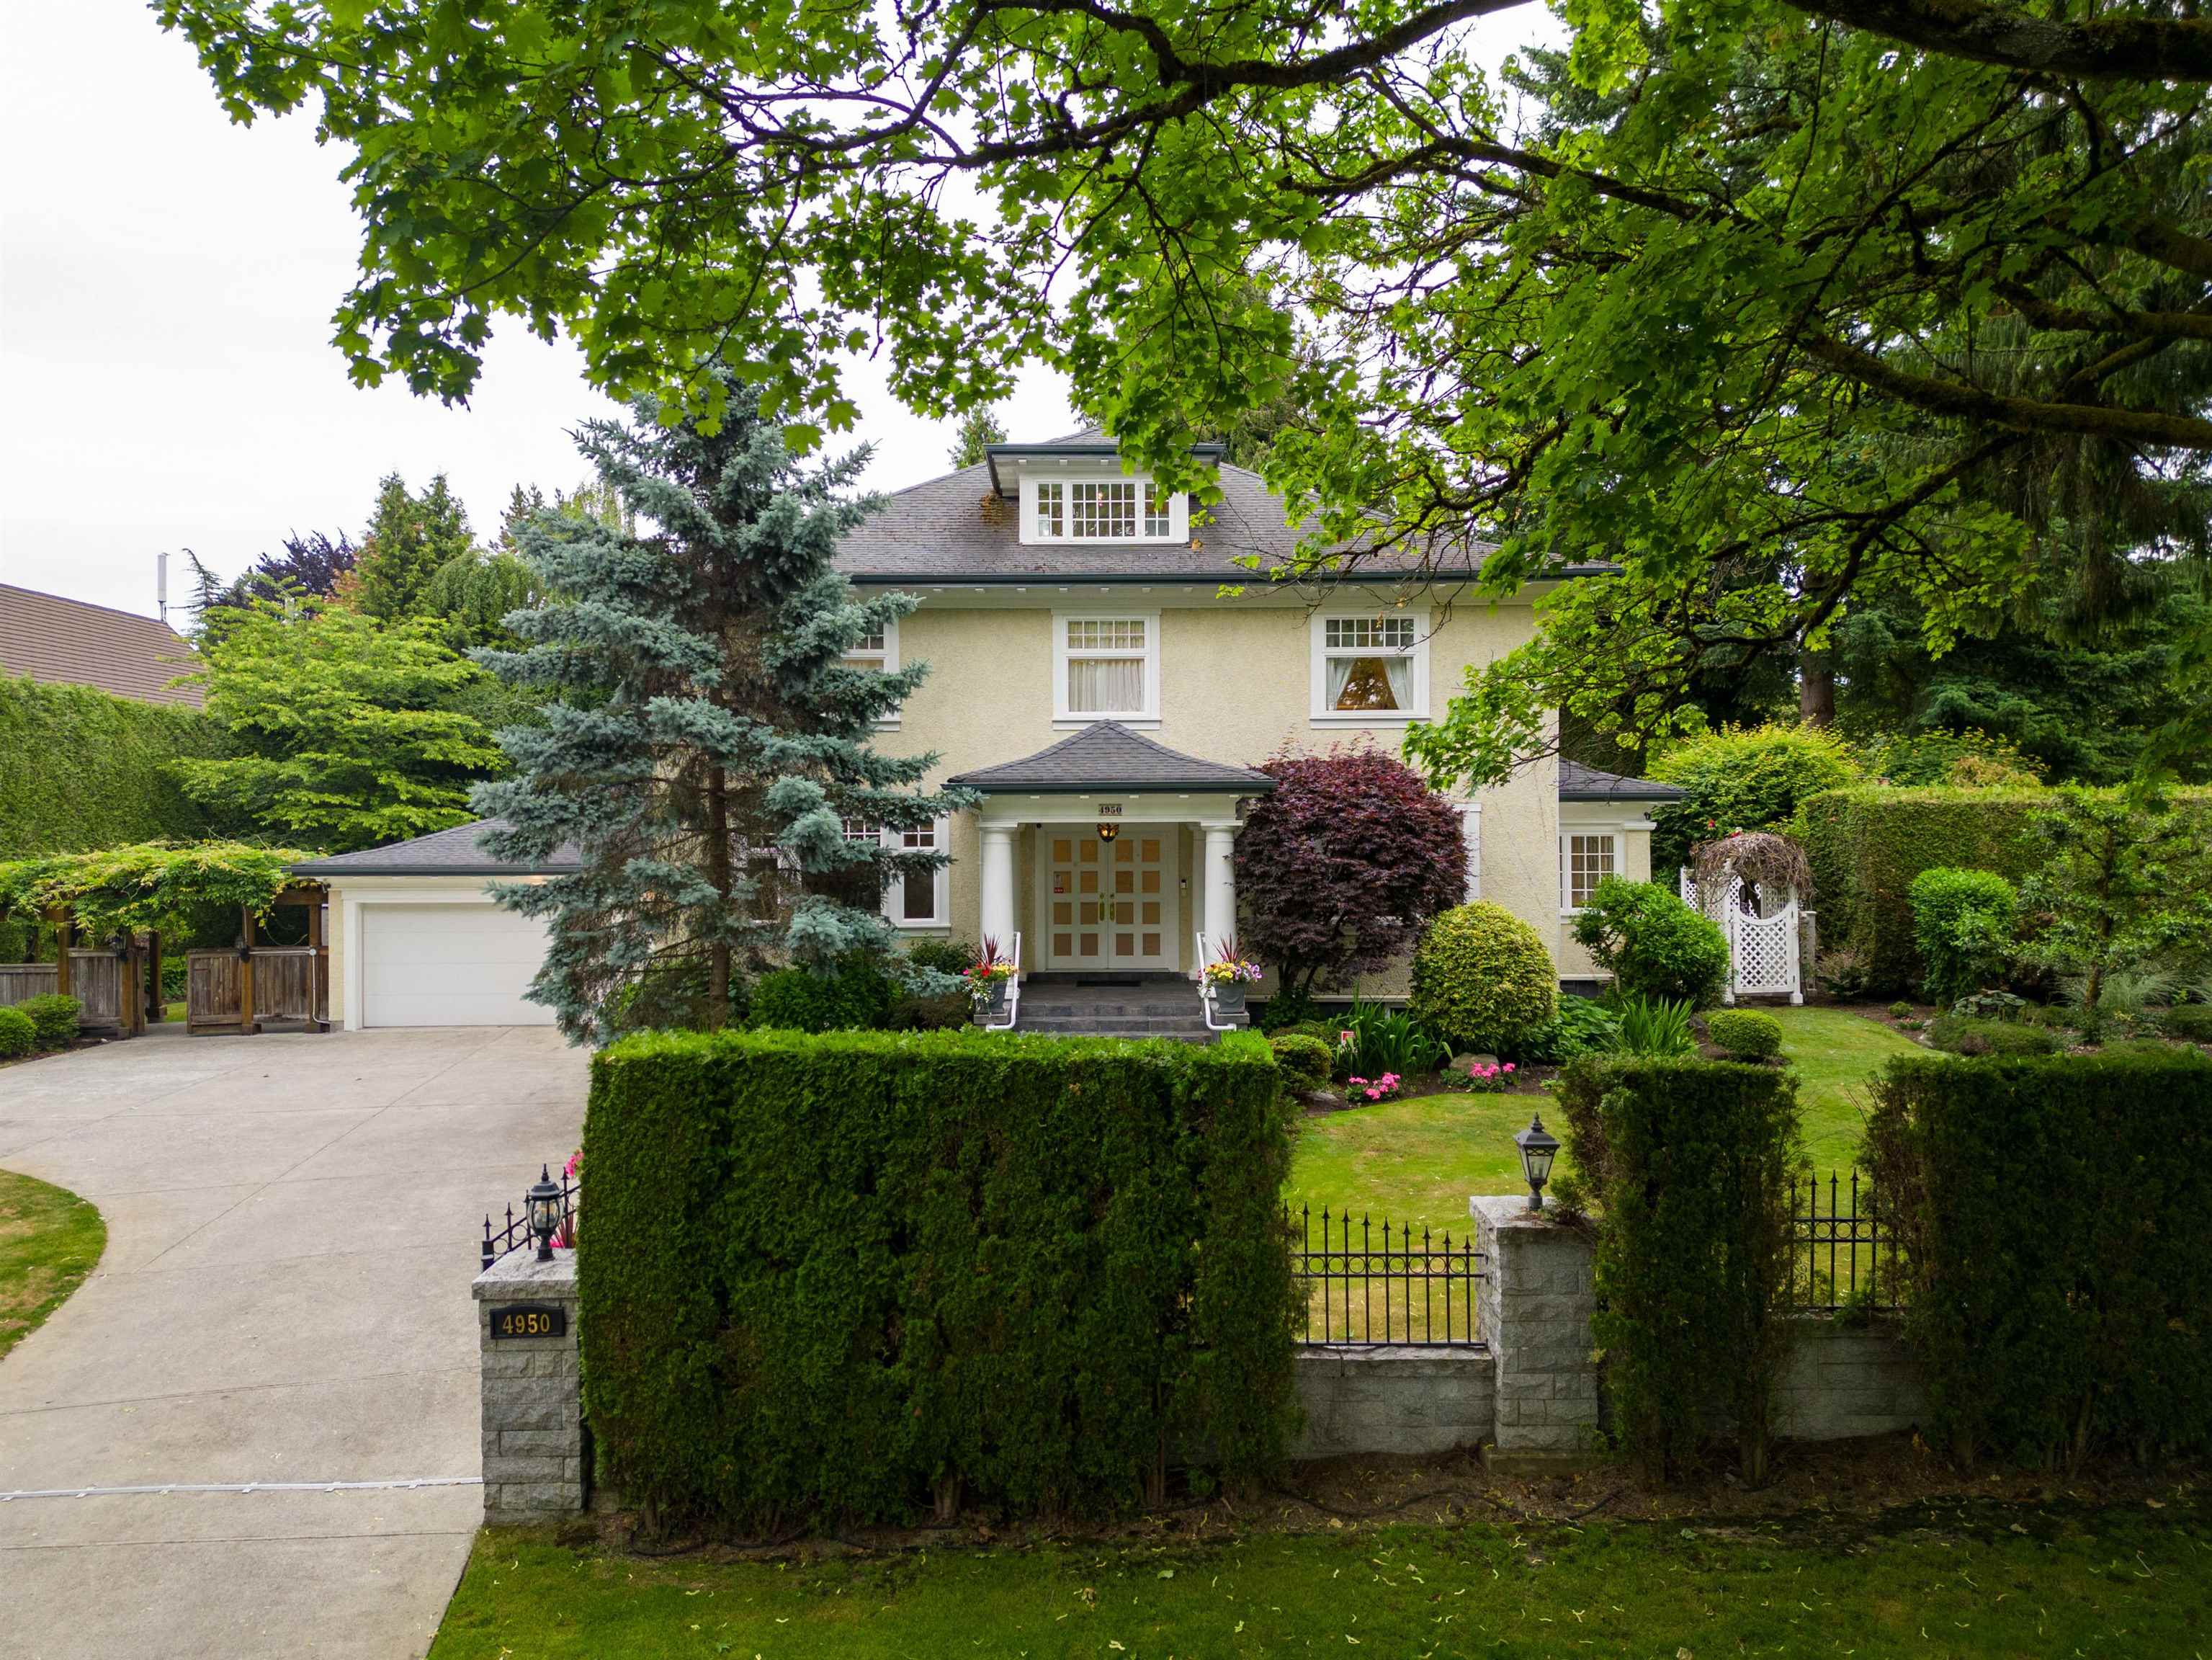 Listing image of 4950 CONNAUGHT DRIVE